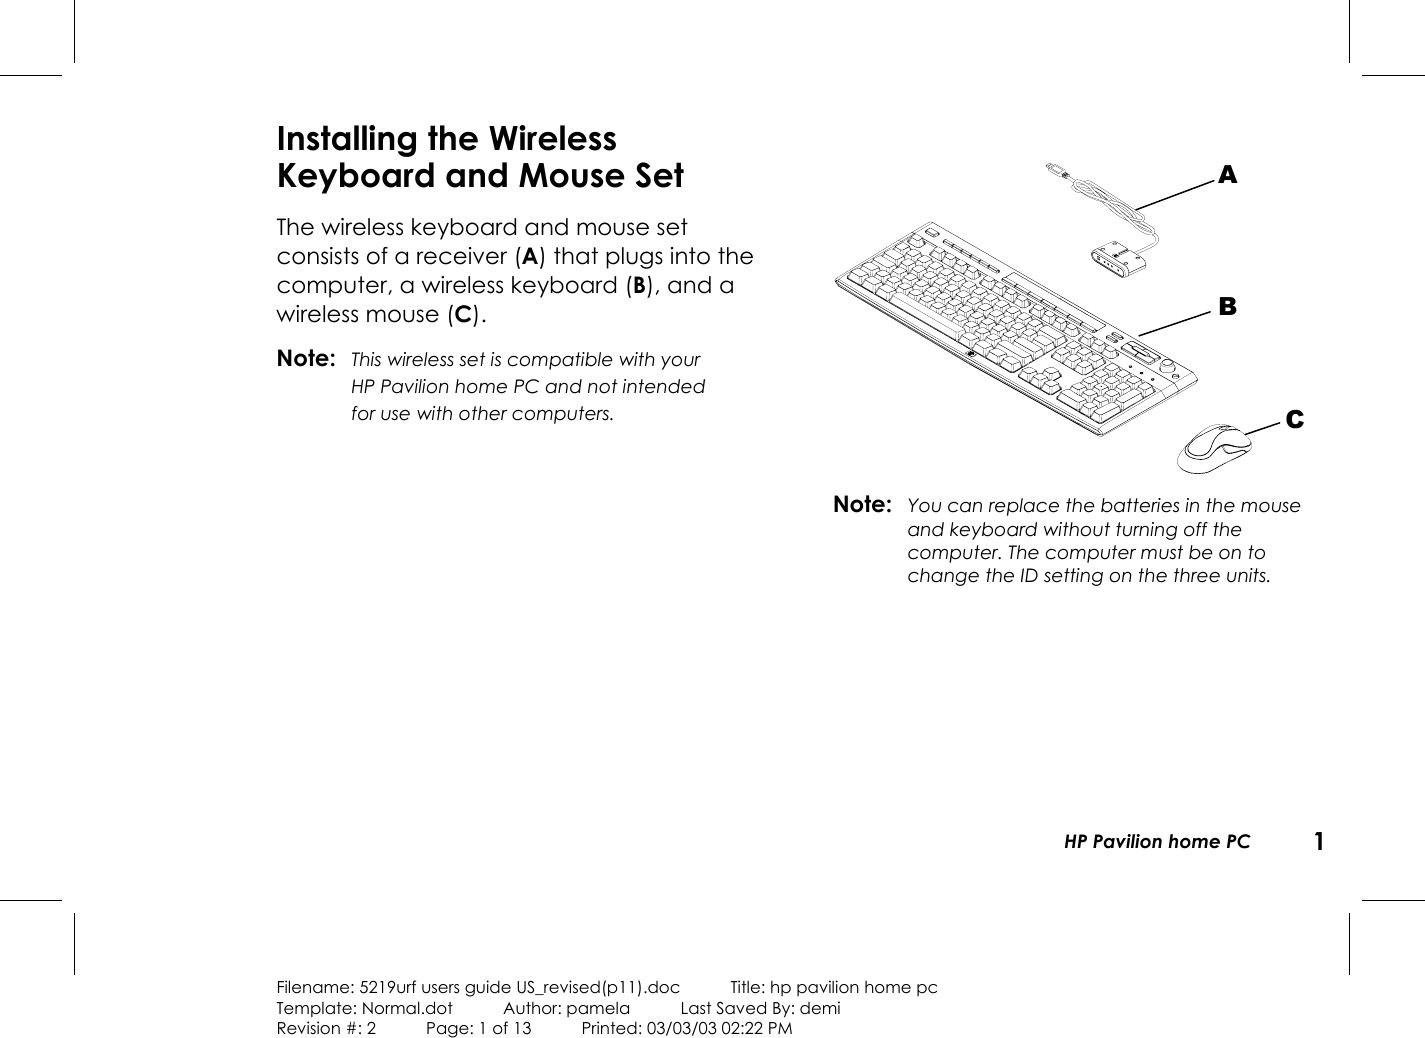 HP Pavilion home PC 1Filename: 5219urf users guide US_revised(p11).doc            Title: hp pavilion home pcTemplate: Normal.dot      Author: pamela      Last Saved By: demiRevision #: 2      Page: 1 of 13      Printed: 03/03/03 02:22 PMInstalling the WirelessKeyboard and Mouse SetThe wireless keyboard and mouse setconsists ofa receiver (A) that plugs into thecomputer, a wireless keyboard (B), and awireless mouse (C).Note: This wireless set is compatible with yourHPPavilion home PC and not intendedforusewithother computers.Note: You can replace the batteries in the mouseandkeyboard without turning off thecomputer. The computer must be on tochange the ID setting on the three units.ABC